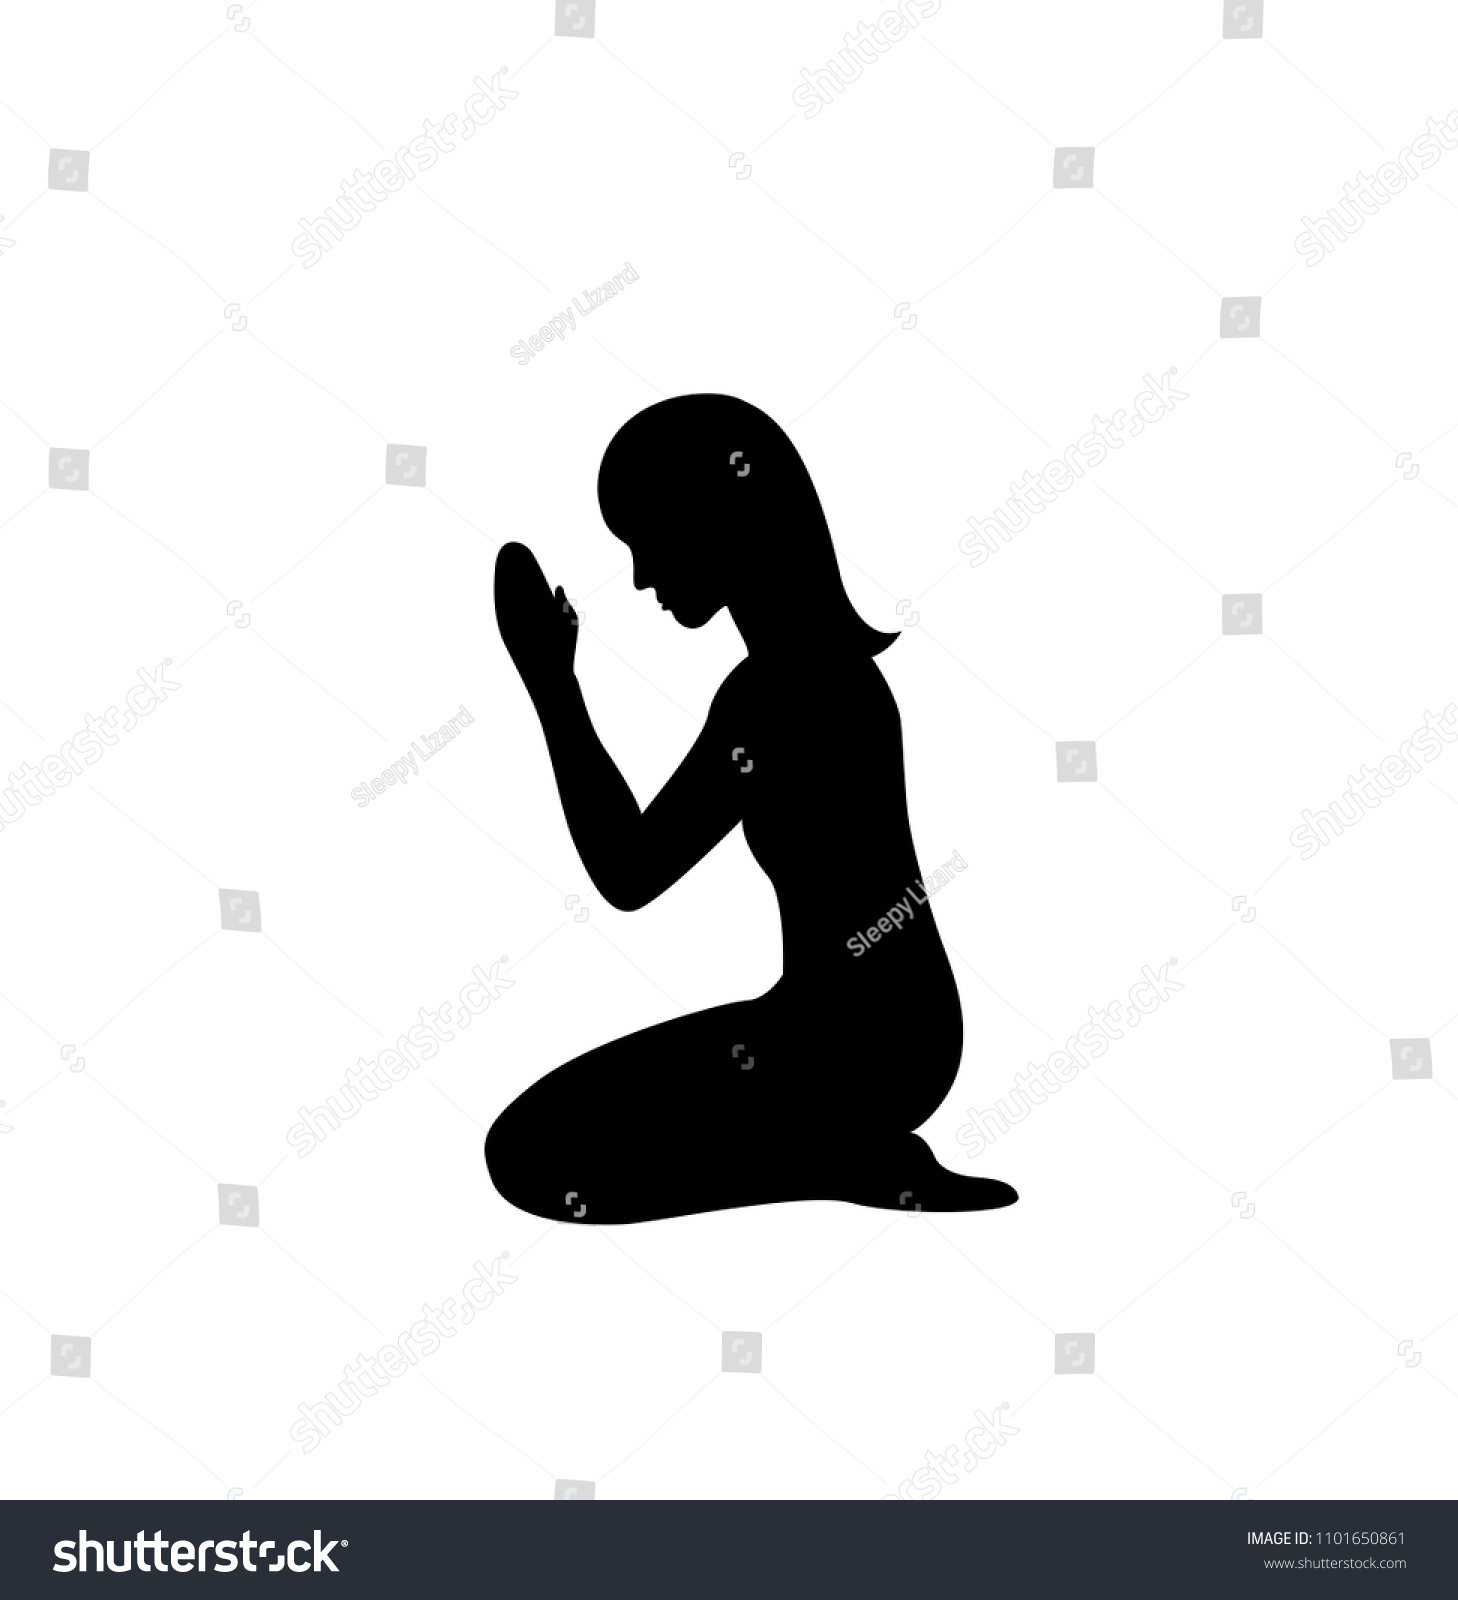 Praying Woman Silhouette Vector Stock Vector (Royalty Free) 1101650861 ...